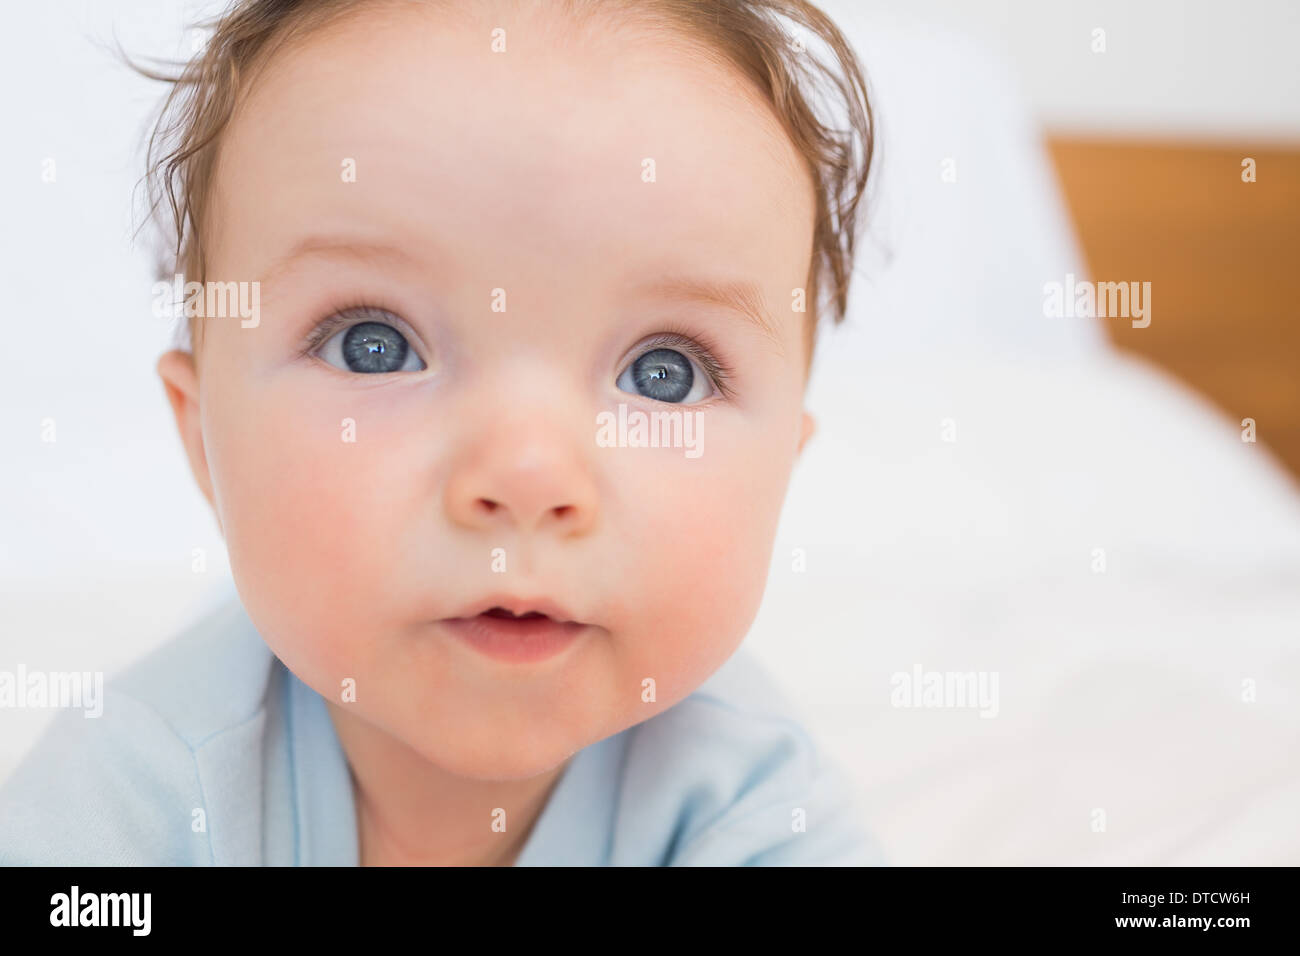 Closeup of cute baby with blue eyes Stock Photo